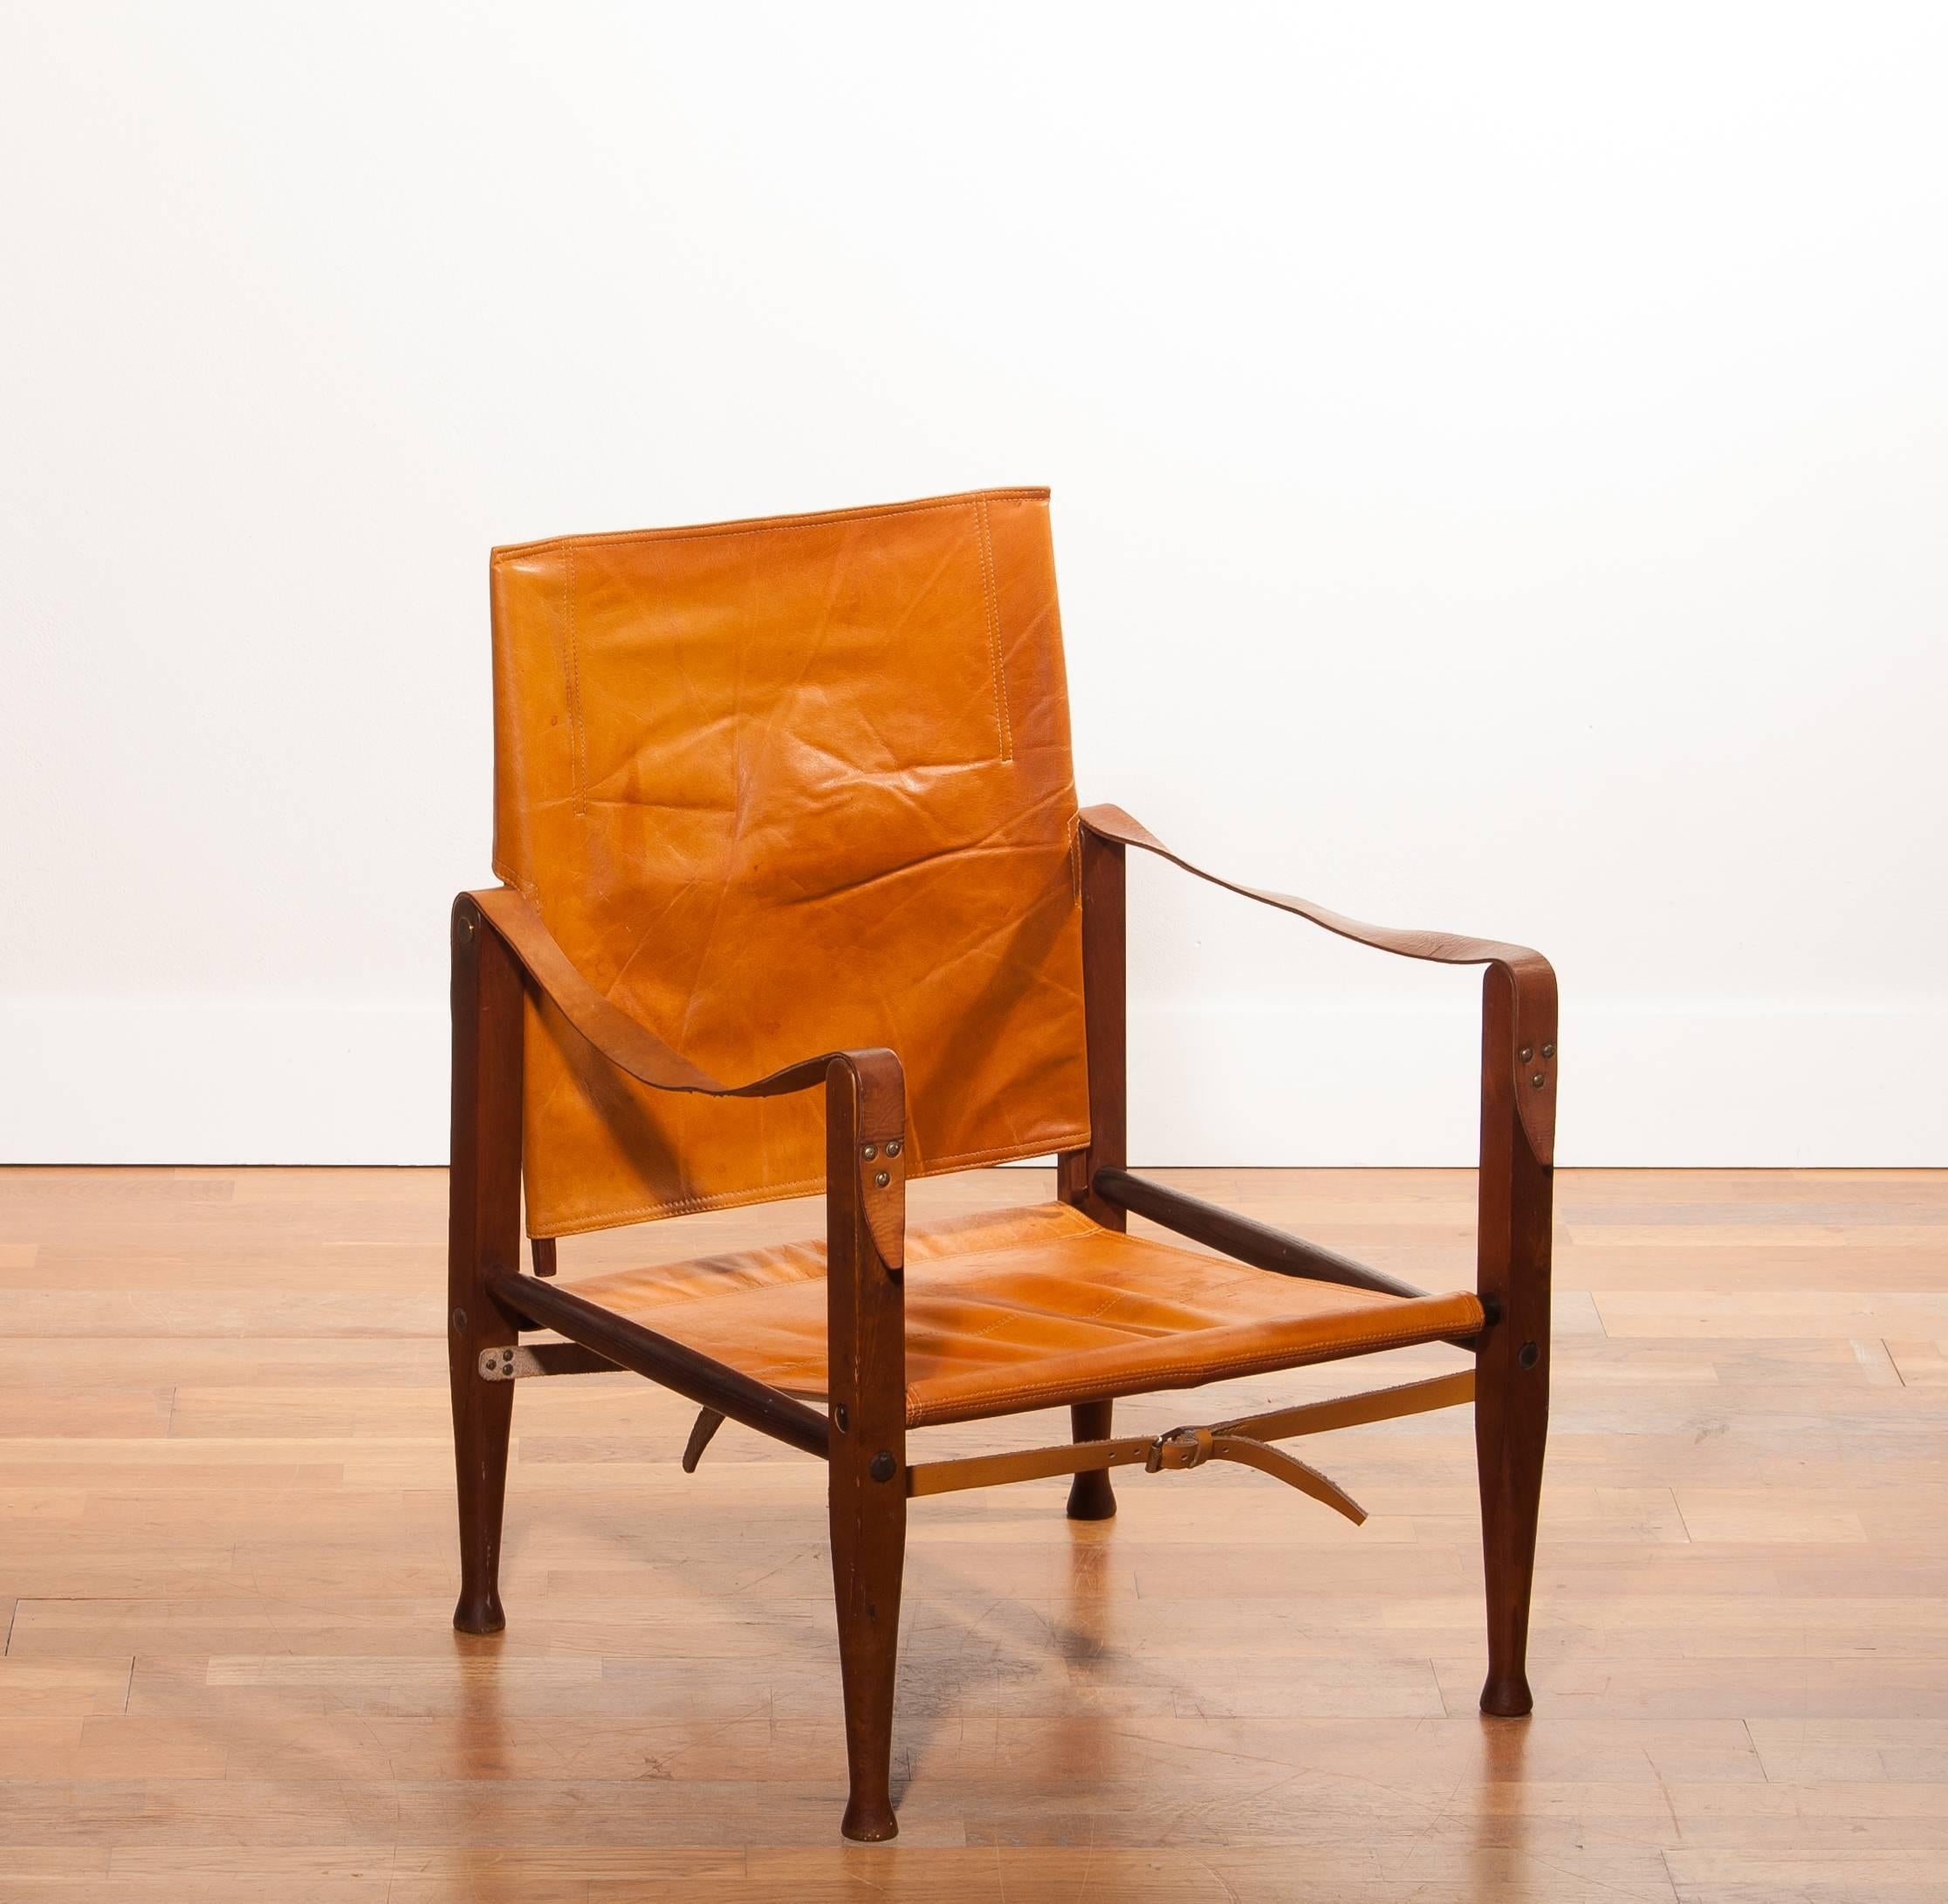 Beautiful safari chair designed by Kaare Klint for Red, Rasmussen Denmark.
This chair has a very nice patinated cognac leather seating on a wooden frame.
It is in a good condition with few signs of age related wear.
Period 1930s
Dimensions: H 81